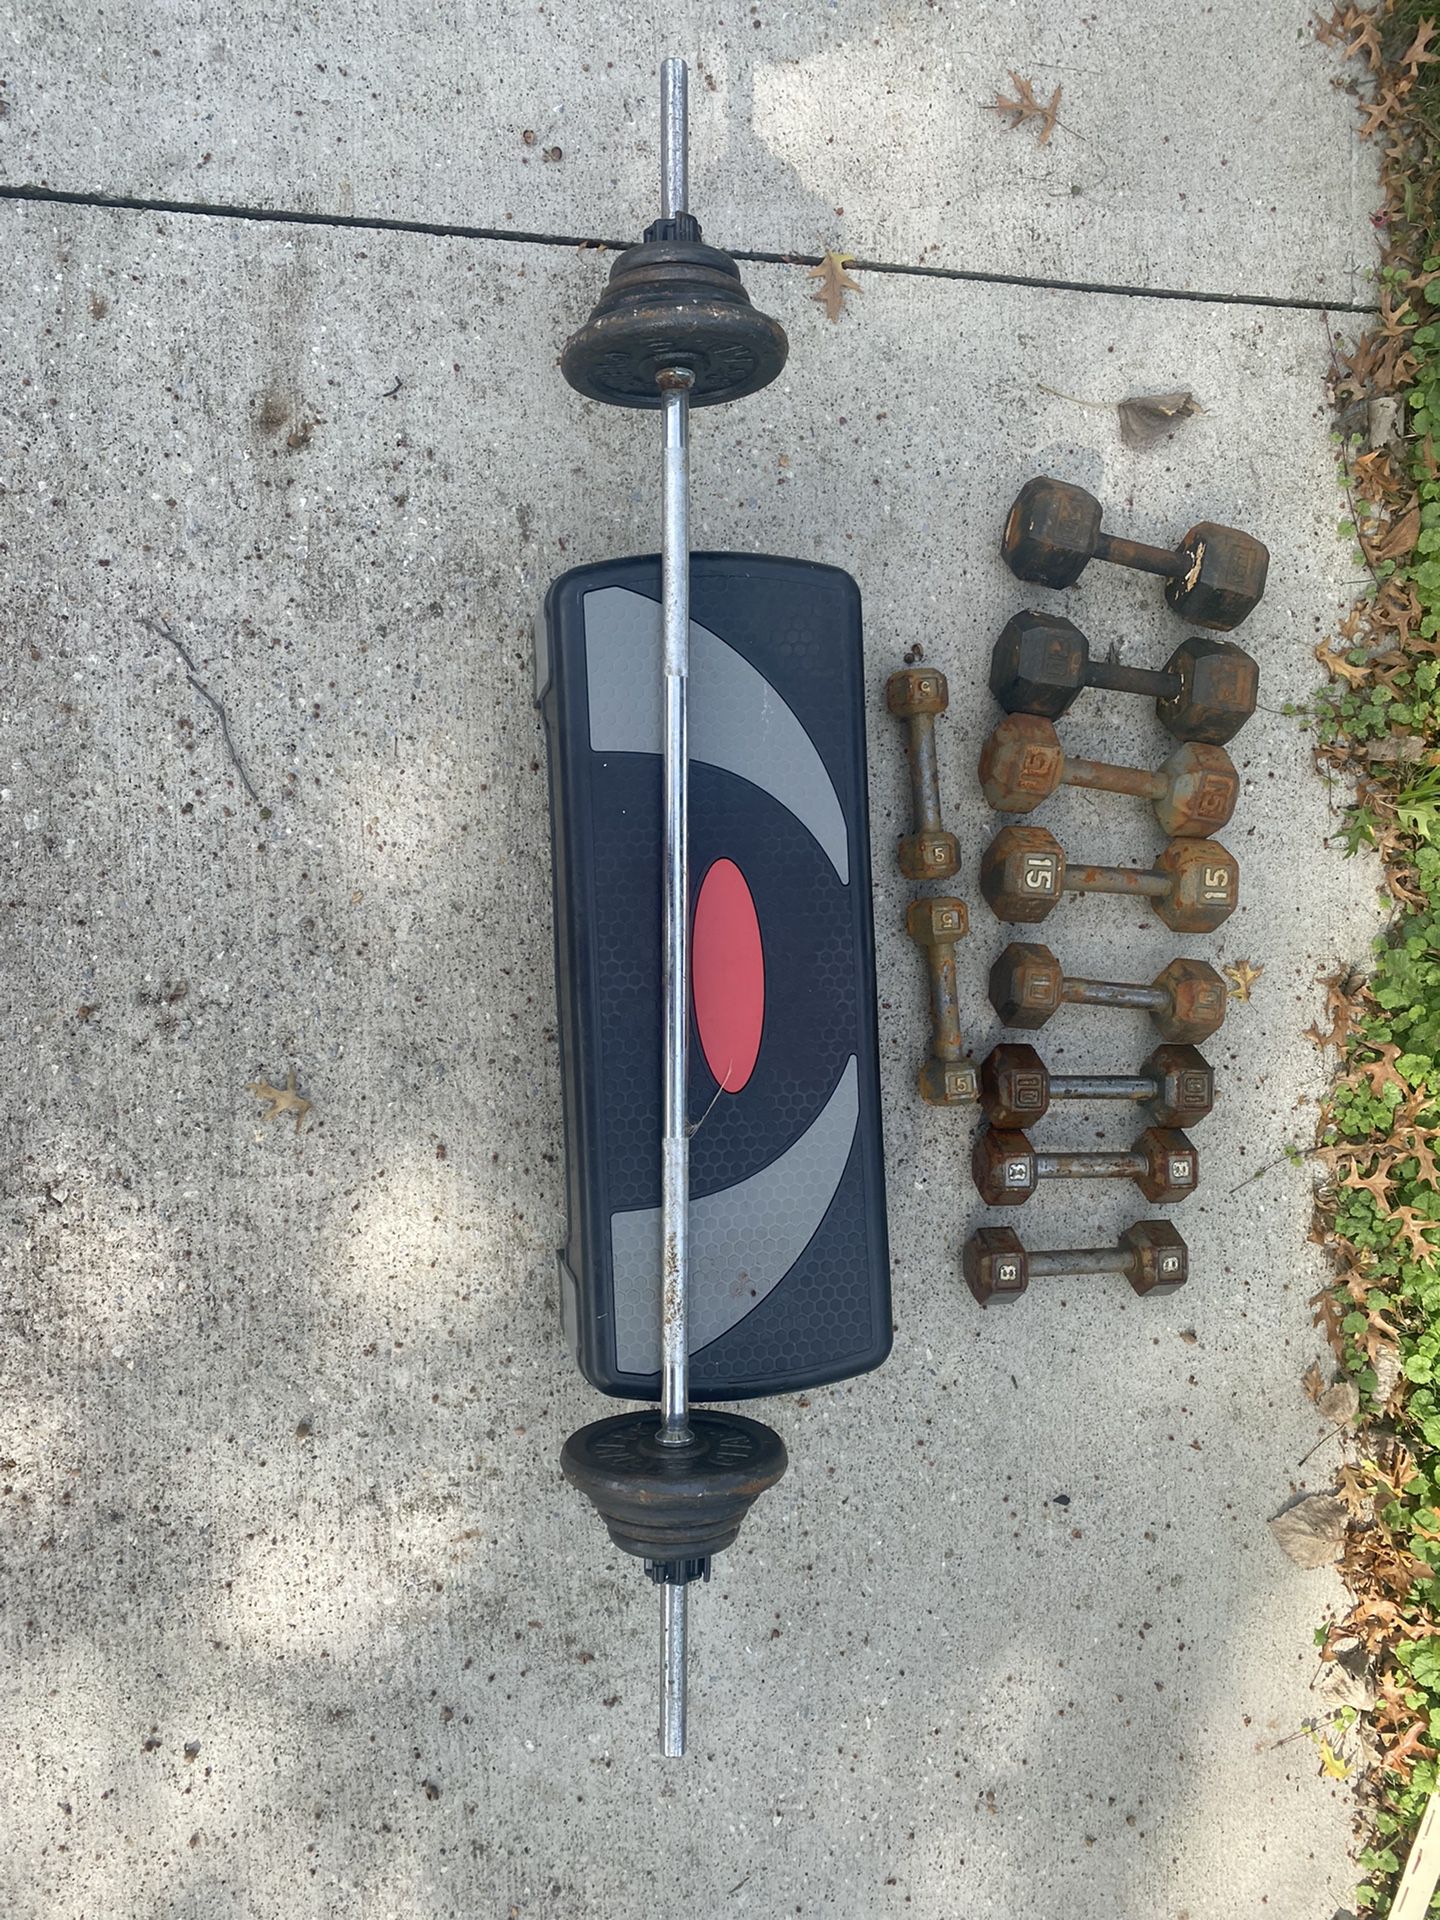 Set of dumbbells and barbell